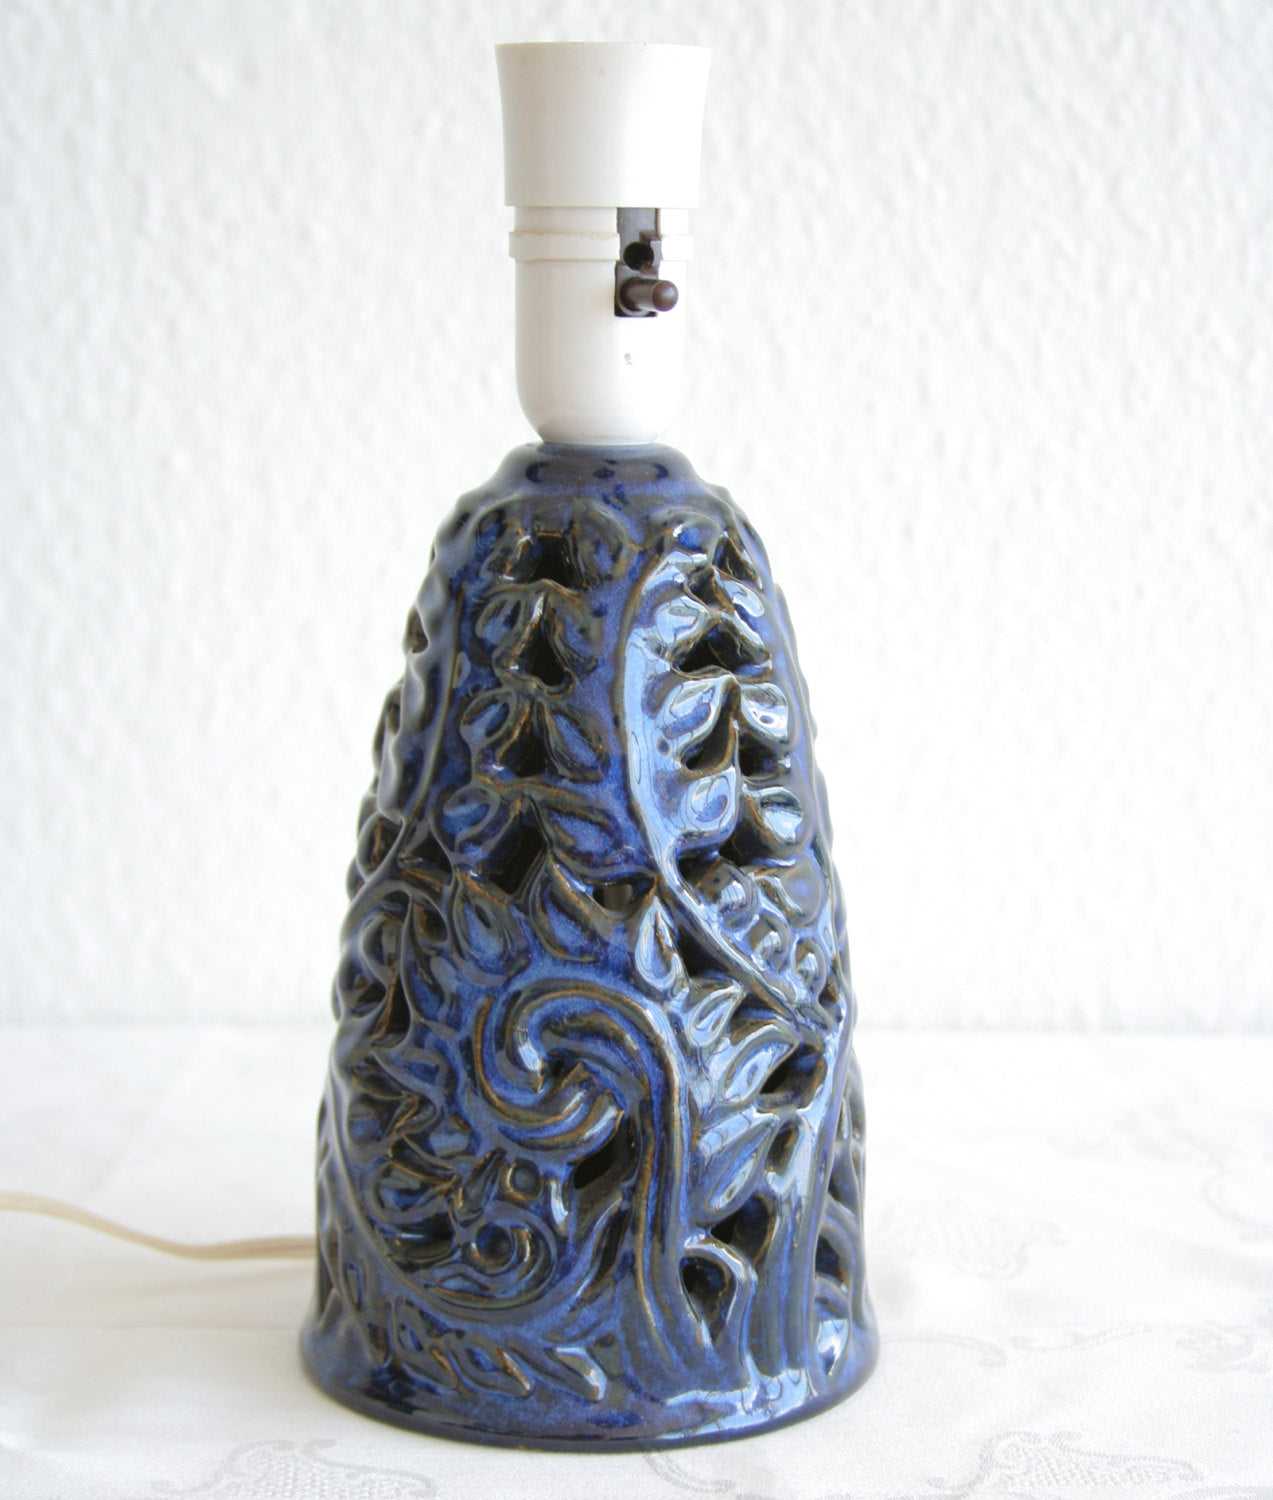 L. HJORTH Azure Blue Openwork Leaves and Branches Stoneware Table Lamp Mollaris.com 